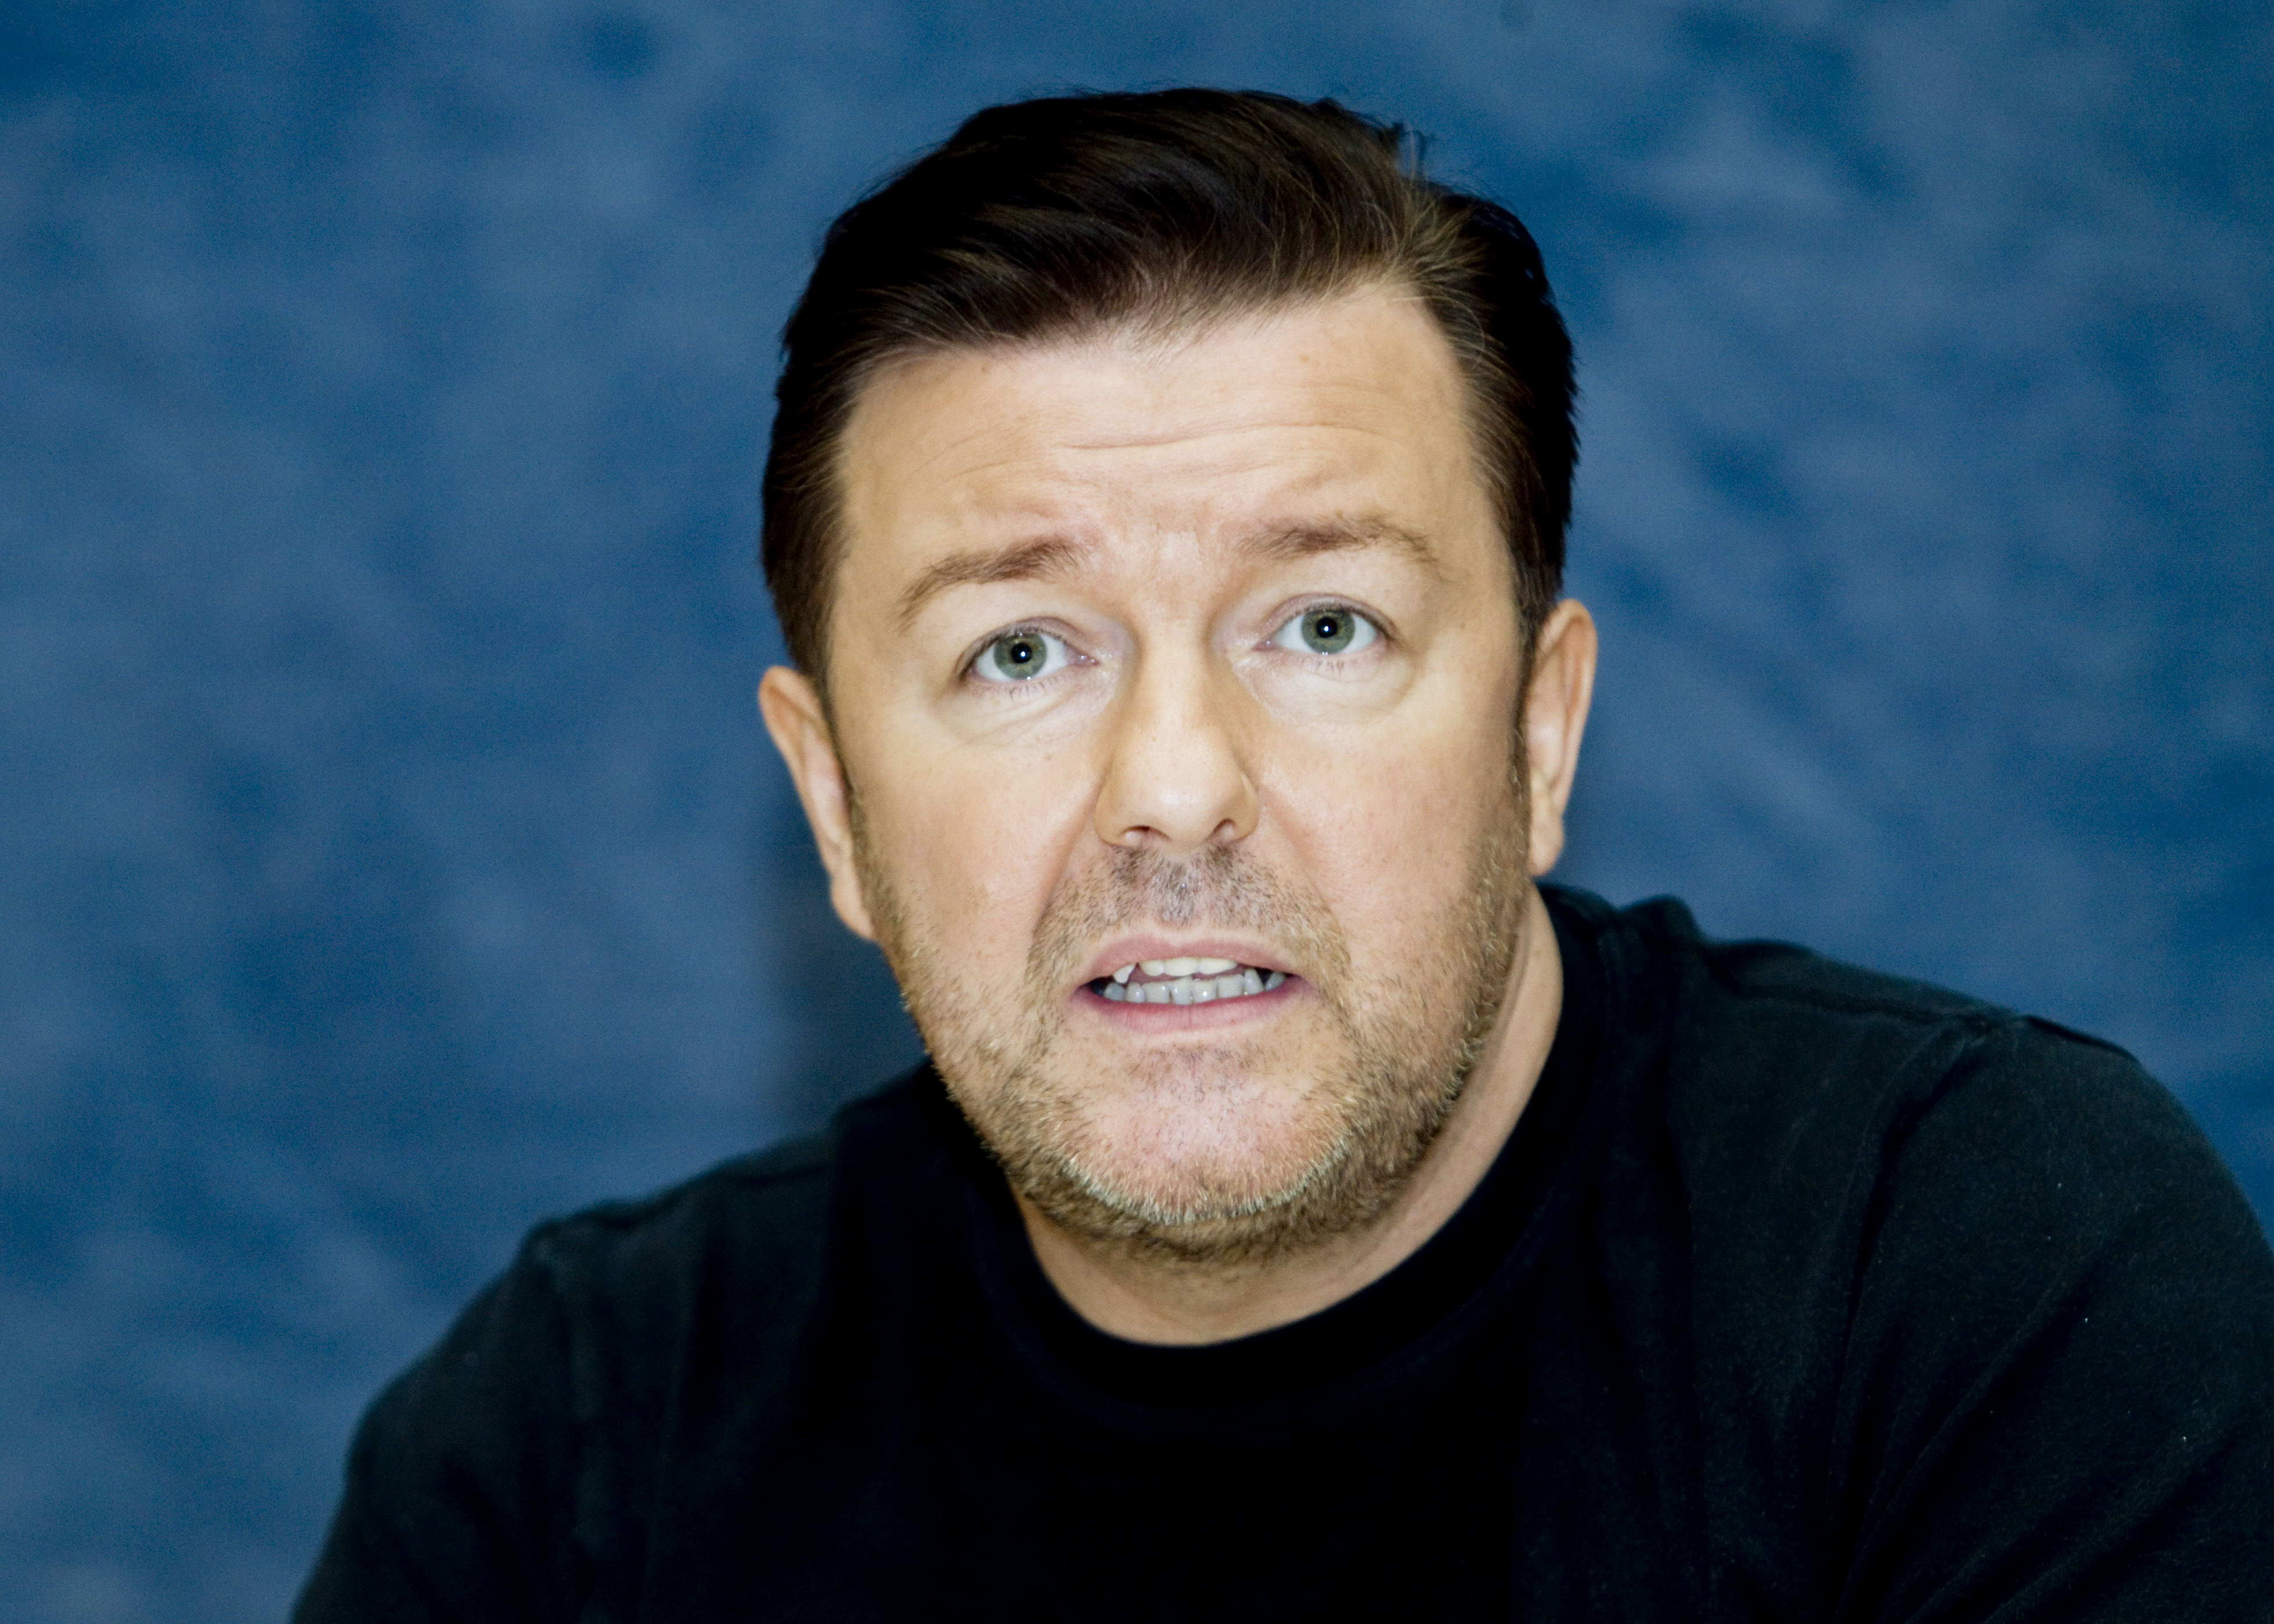 Ricky Gervais, The Office